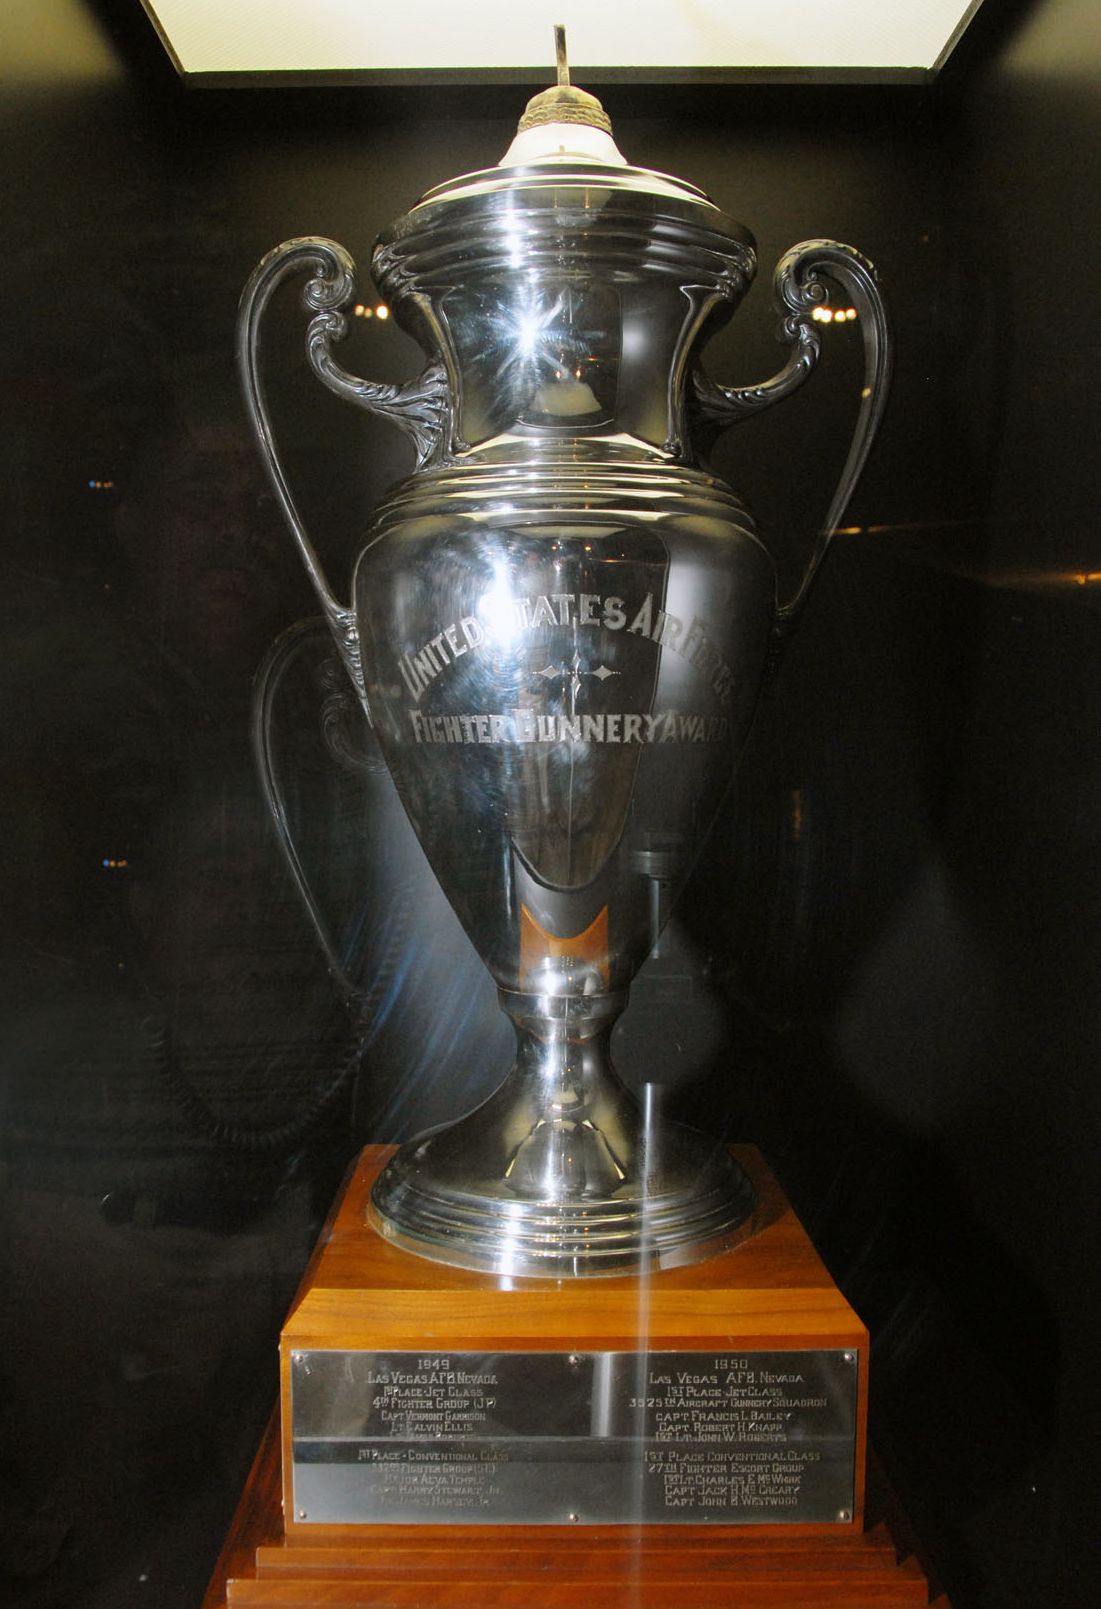 The trophy won by the Tuskegee team is now on display, but was hidden in storage for 46 years. National Museum of the US Air Force.